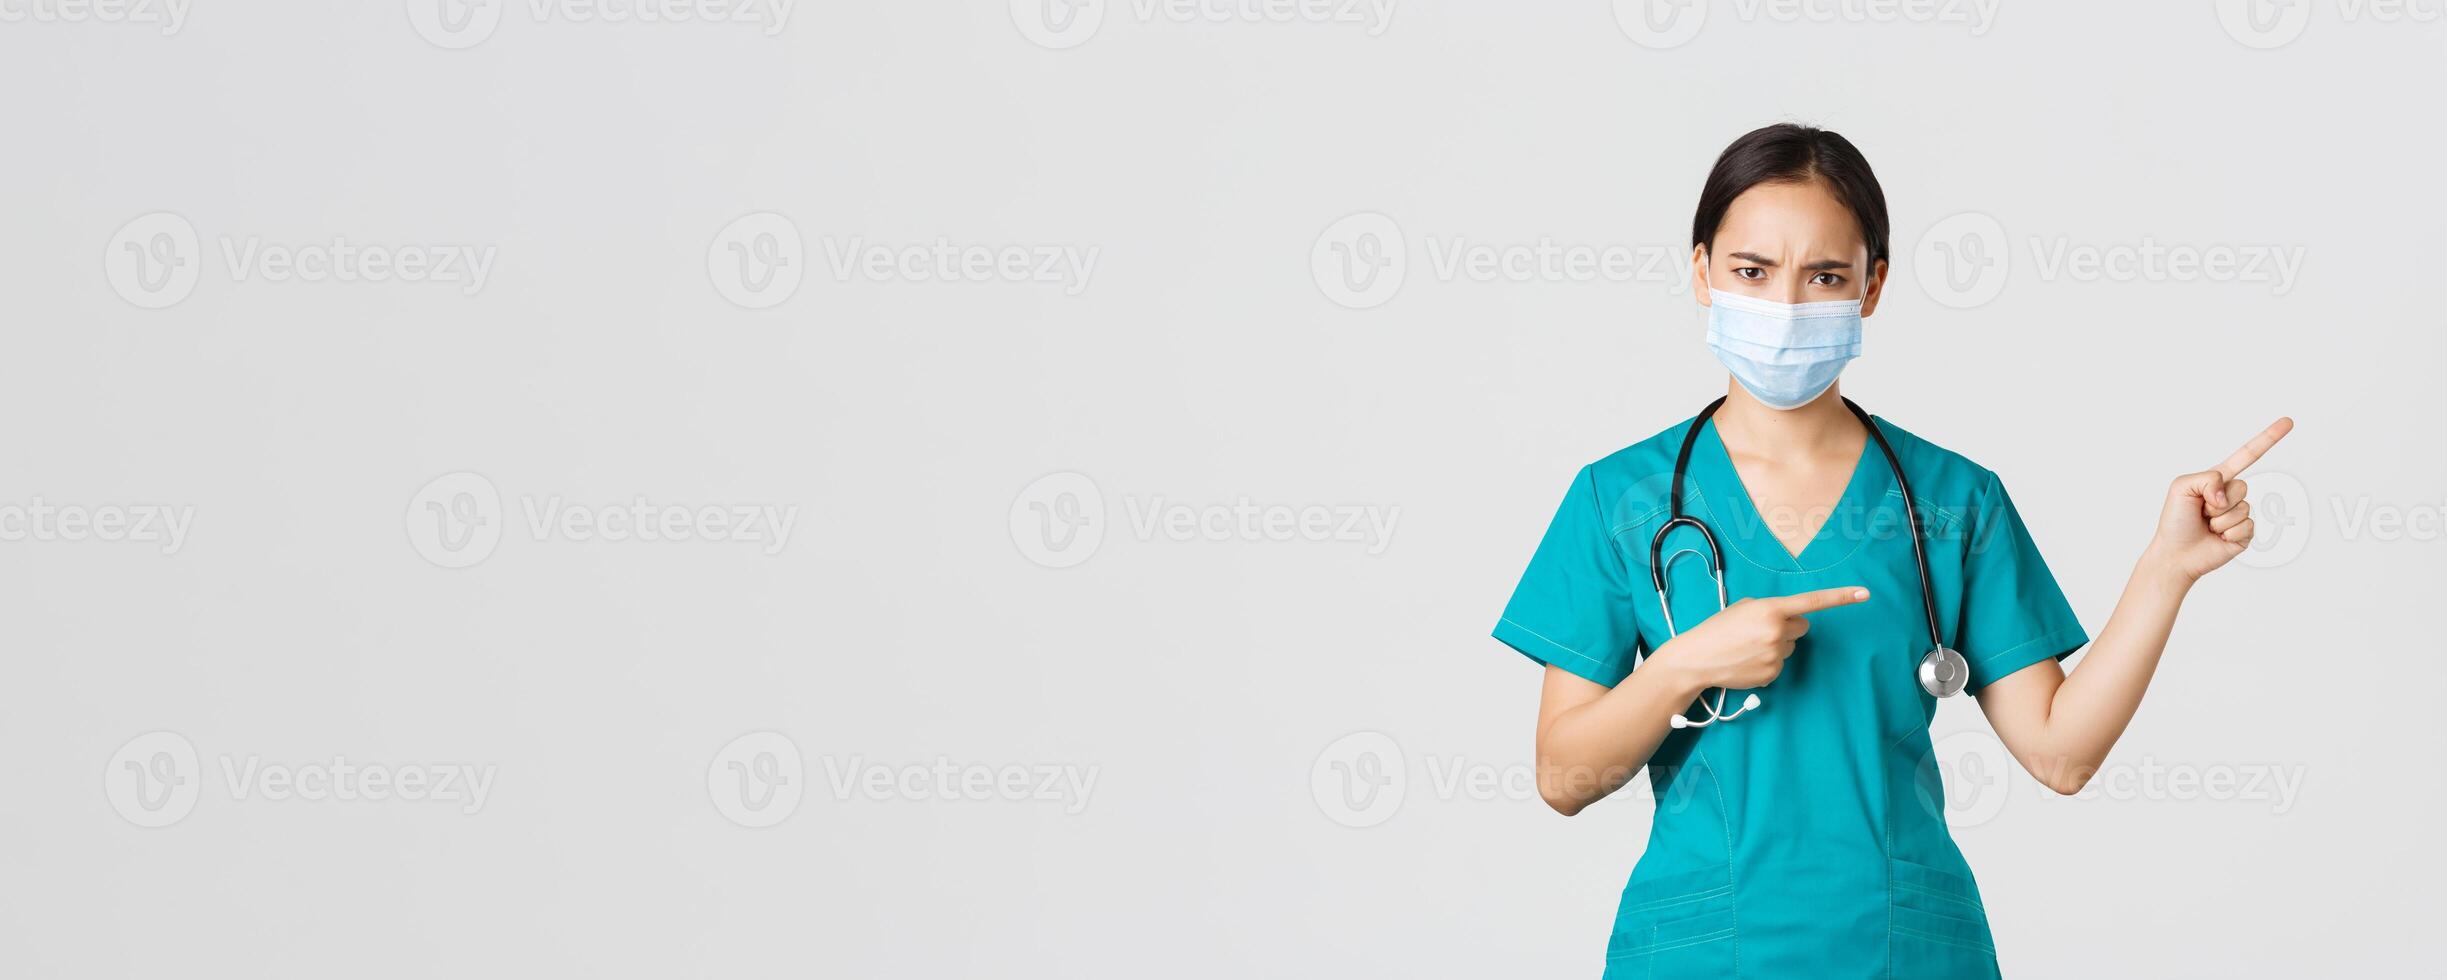 Covid-19, coronavirus disease, healthcare workers concept. Frowning suspicious or frustrated asian female doctor, wear medical mask and scrubs, pointing upper right corner, white background photo